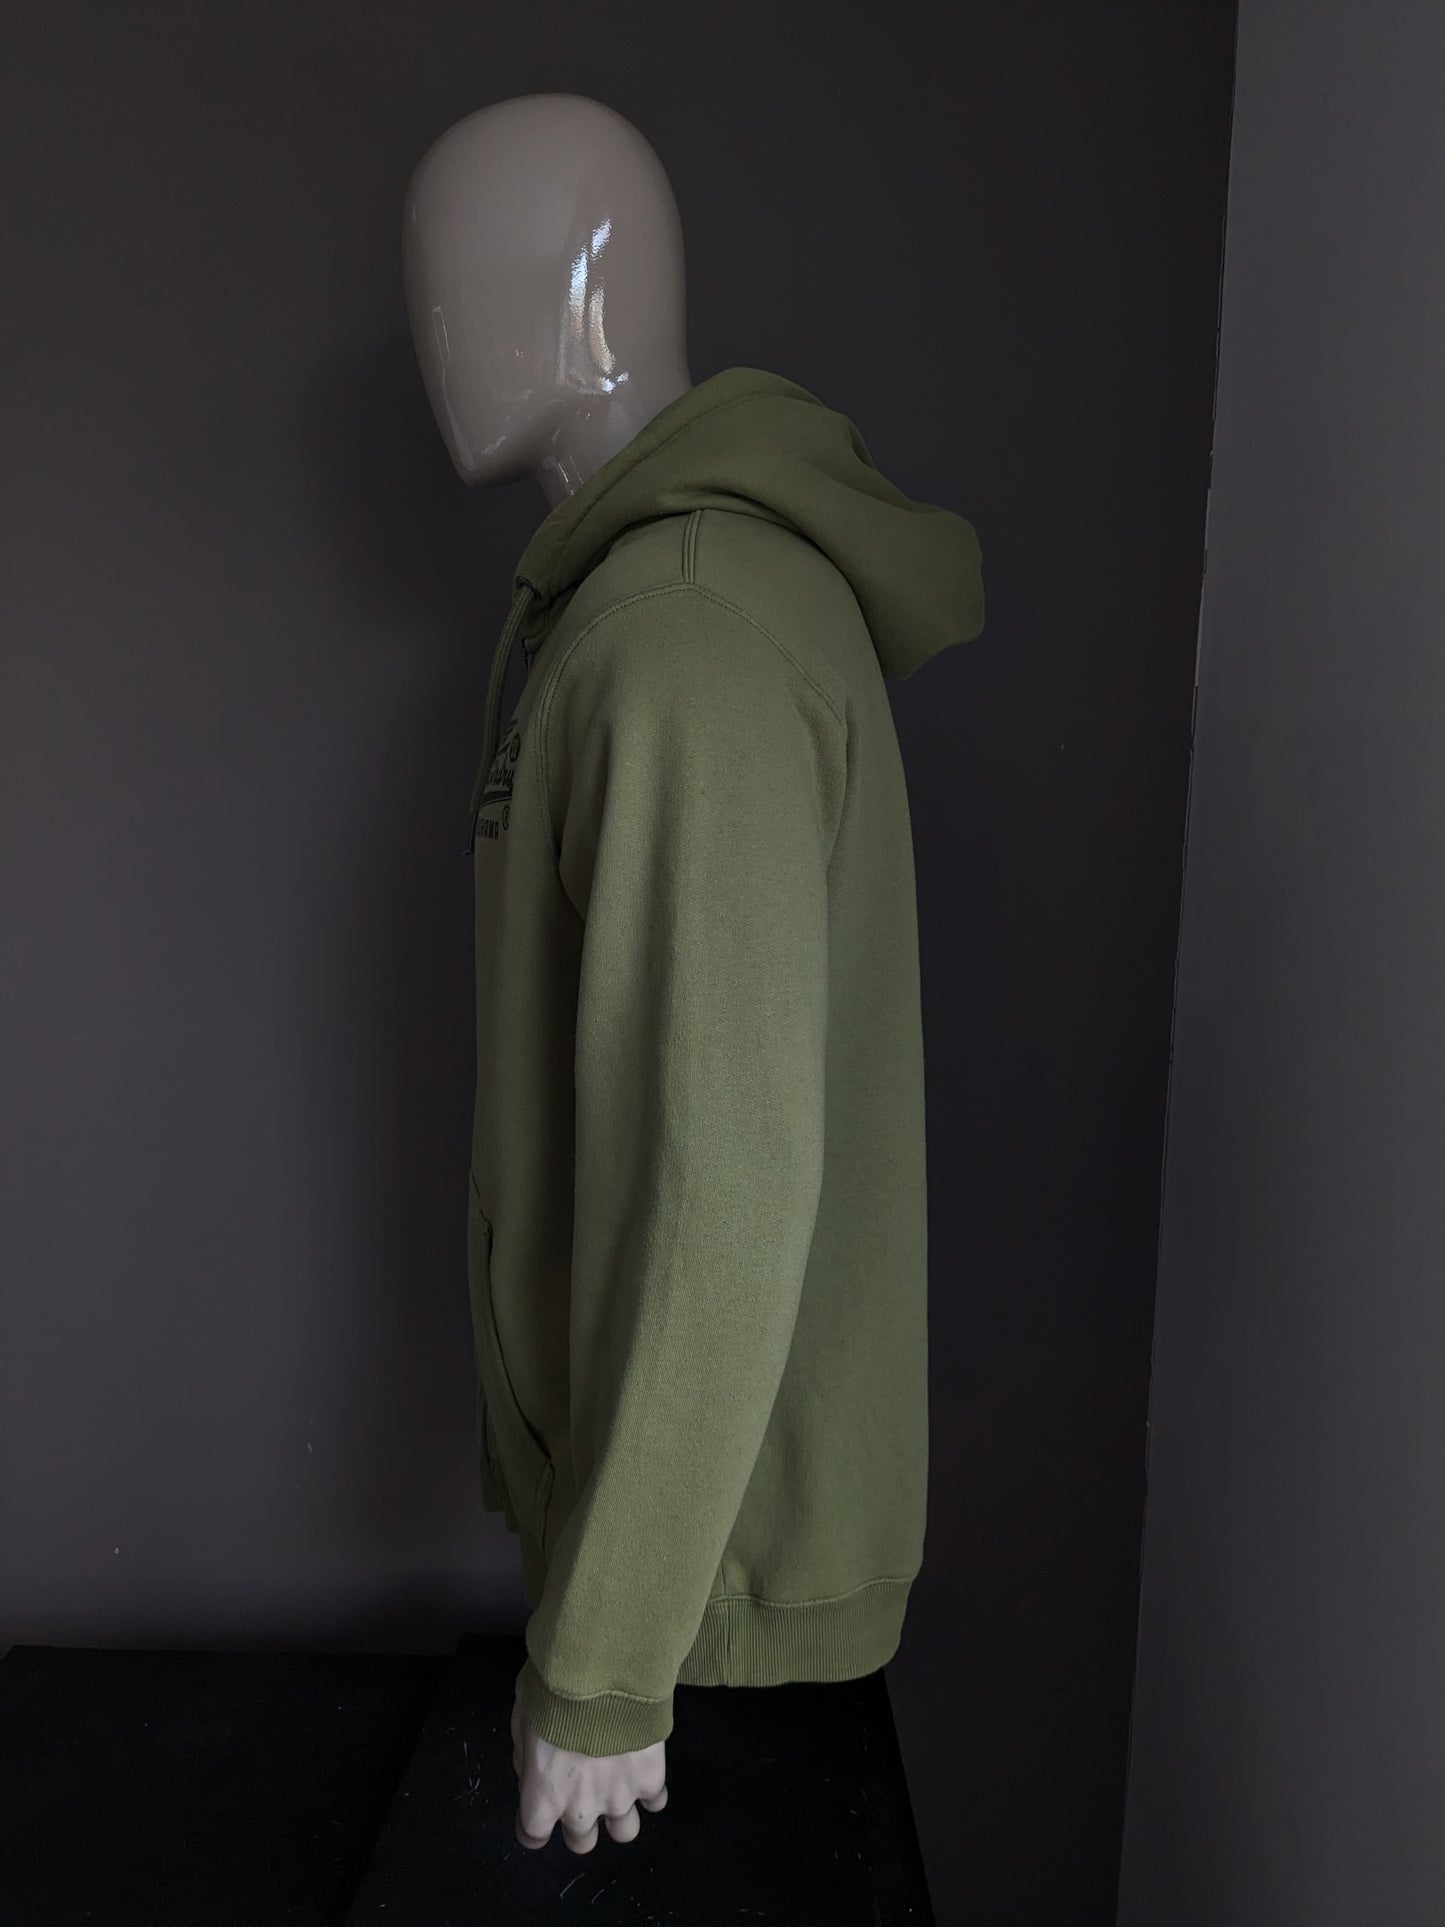 Superdry cardigan with hood. Green. Size L / XL